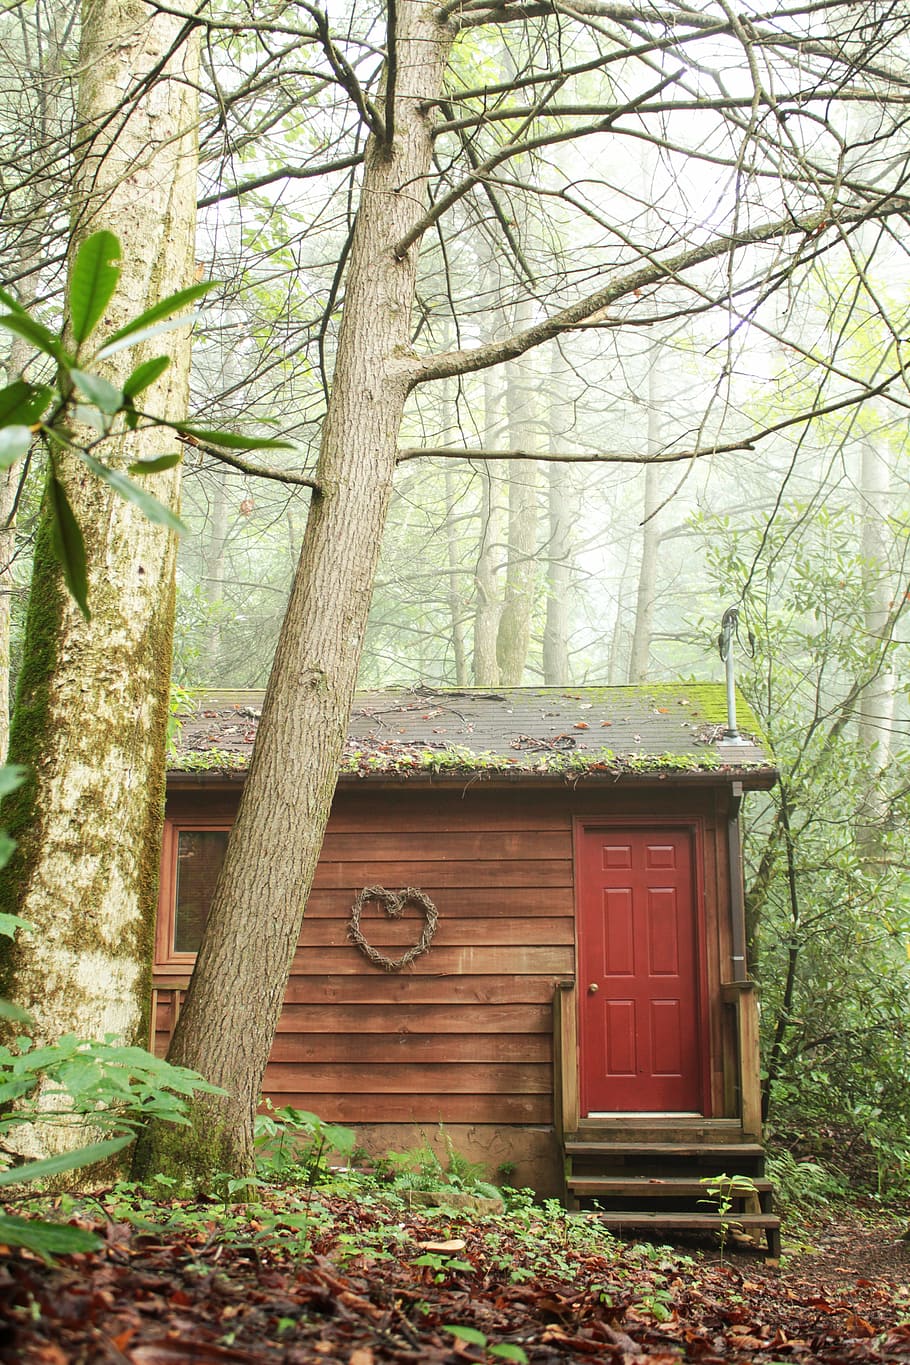 wood, cabin, love nest, trees, forest, home, nature, tree, plant, architecture